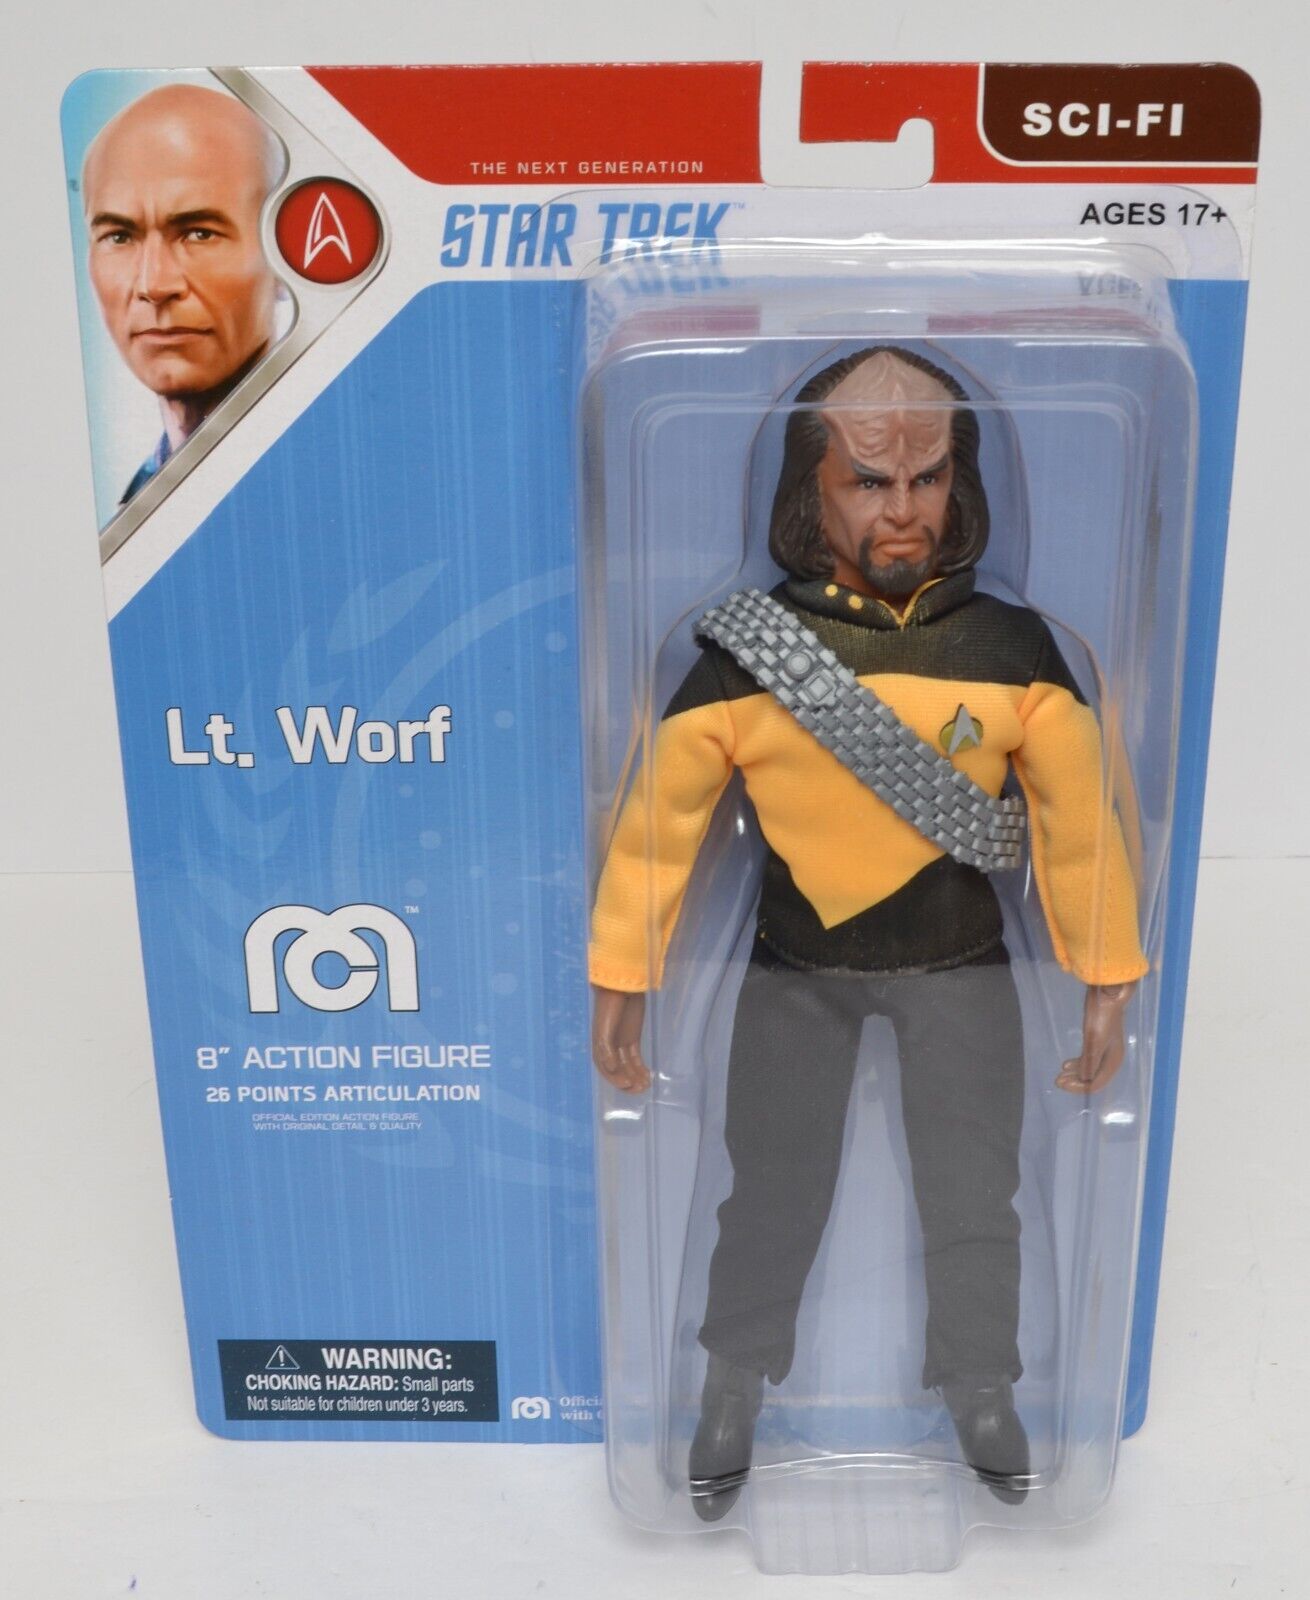 Mego 'Star Trek Next Generation' LT. WORF 8" Figure 2022 New Carded TOPPS Excl.